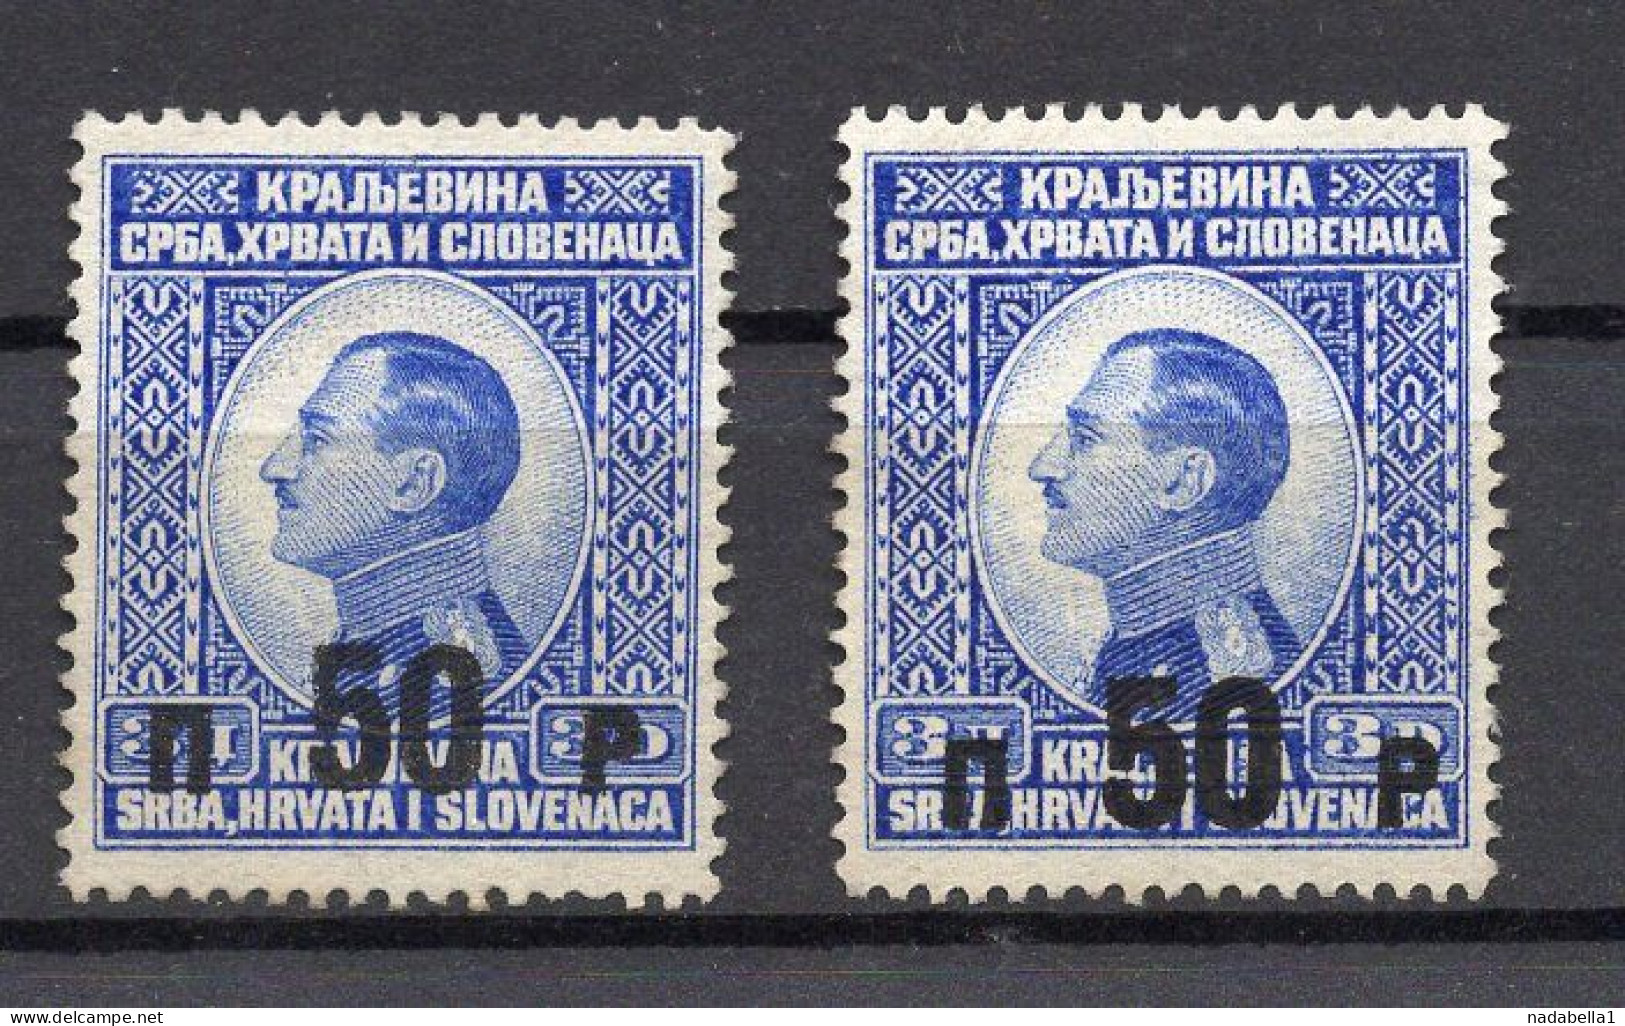 1925. KINGDOM OF SHS,OVERPRINT,SMALL P AND NORMAL SIZE P,2 STAMPS,MNG - Imperforates, Proofs & Errors